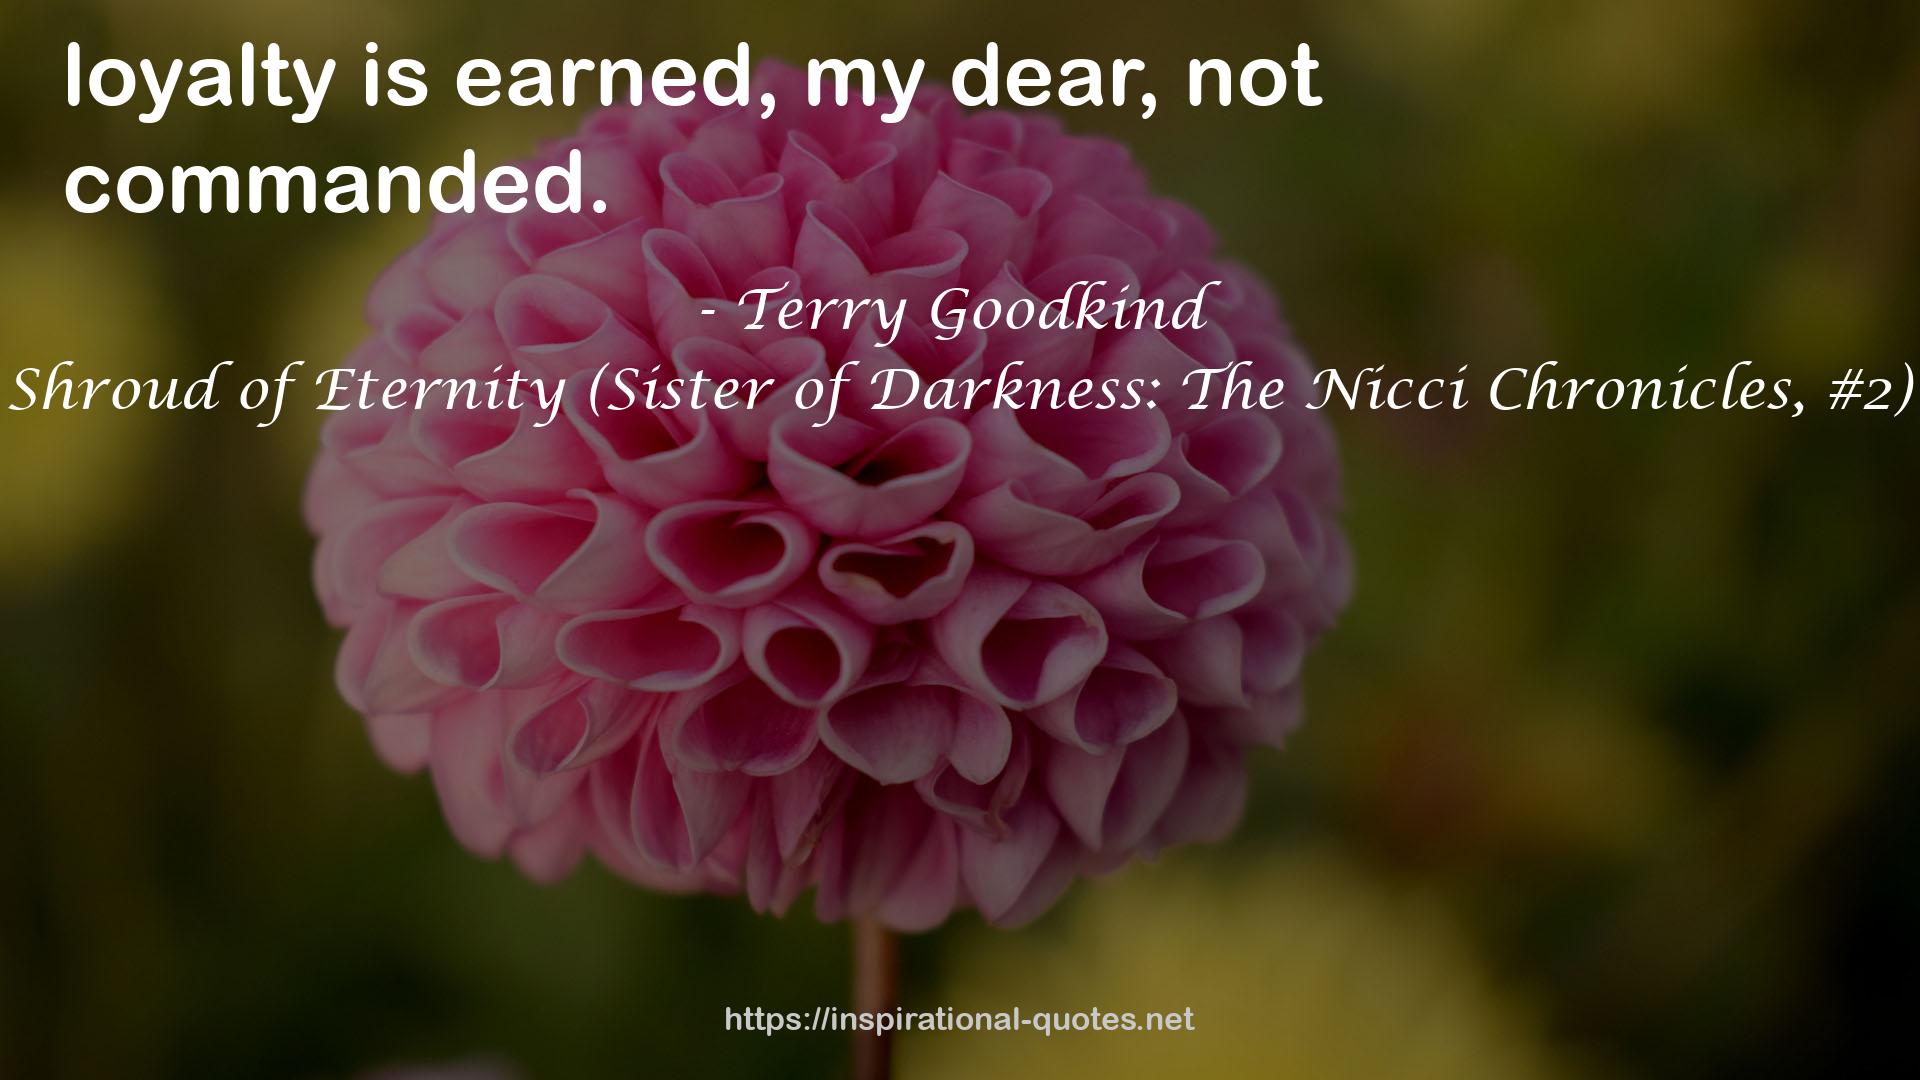 Shroud of Eternity (Sister of Darkness: The Nicci Chronicles, #2) QUOTES